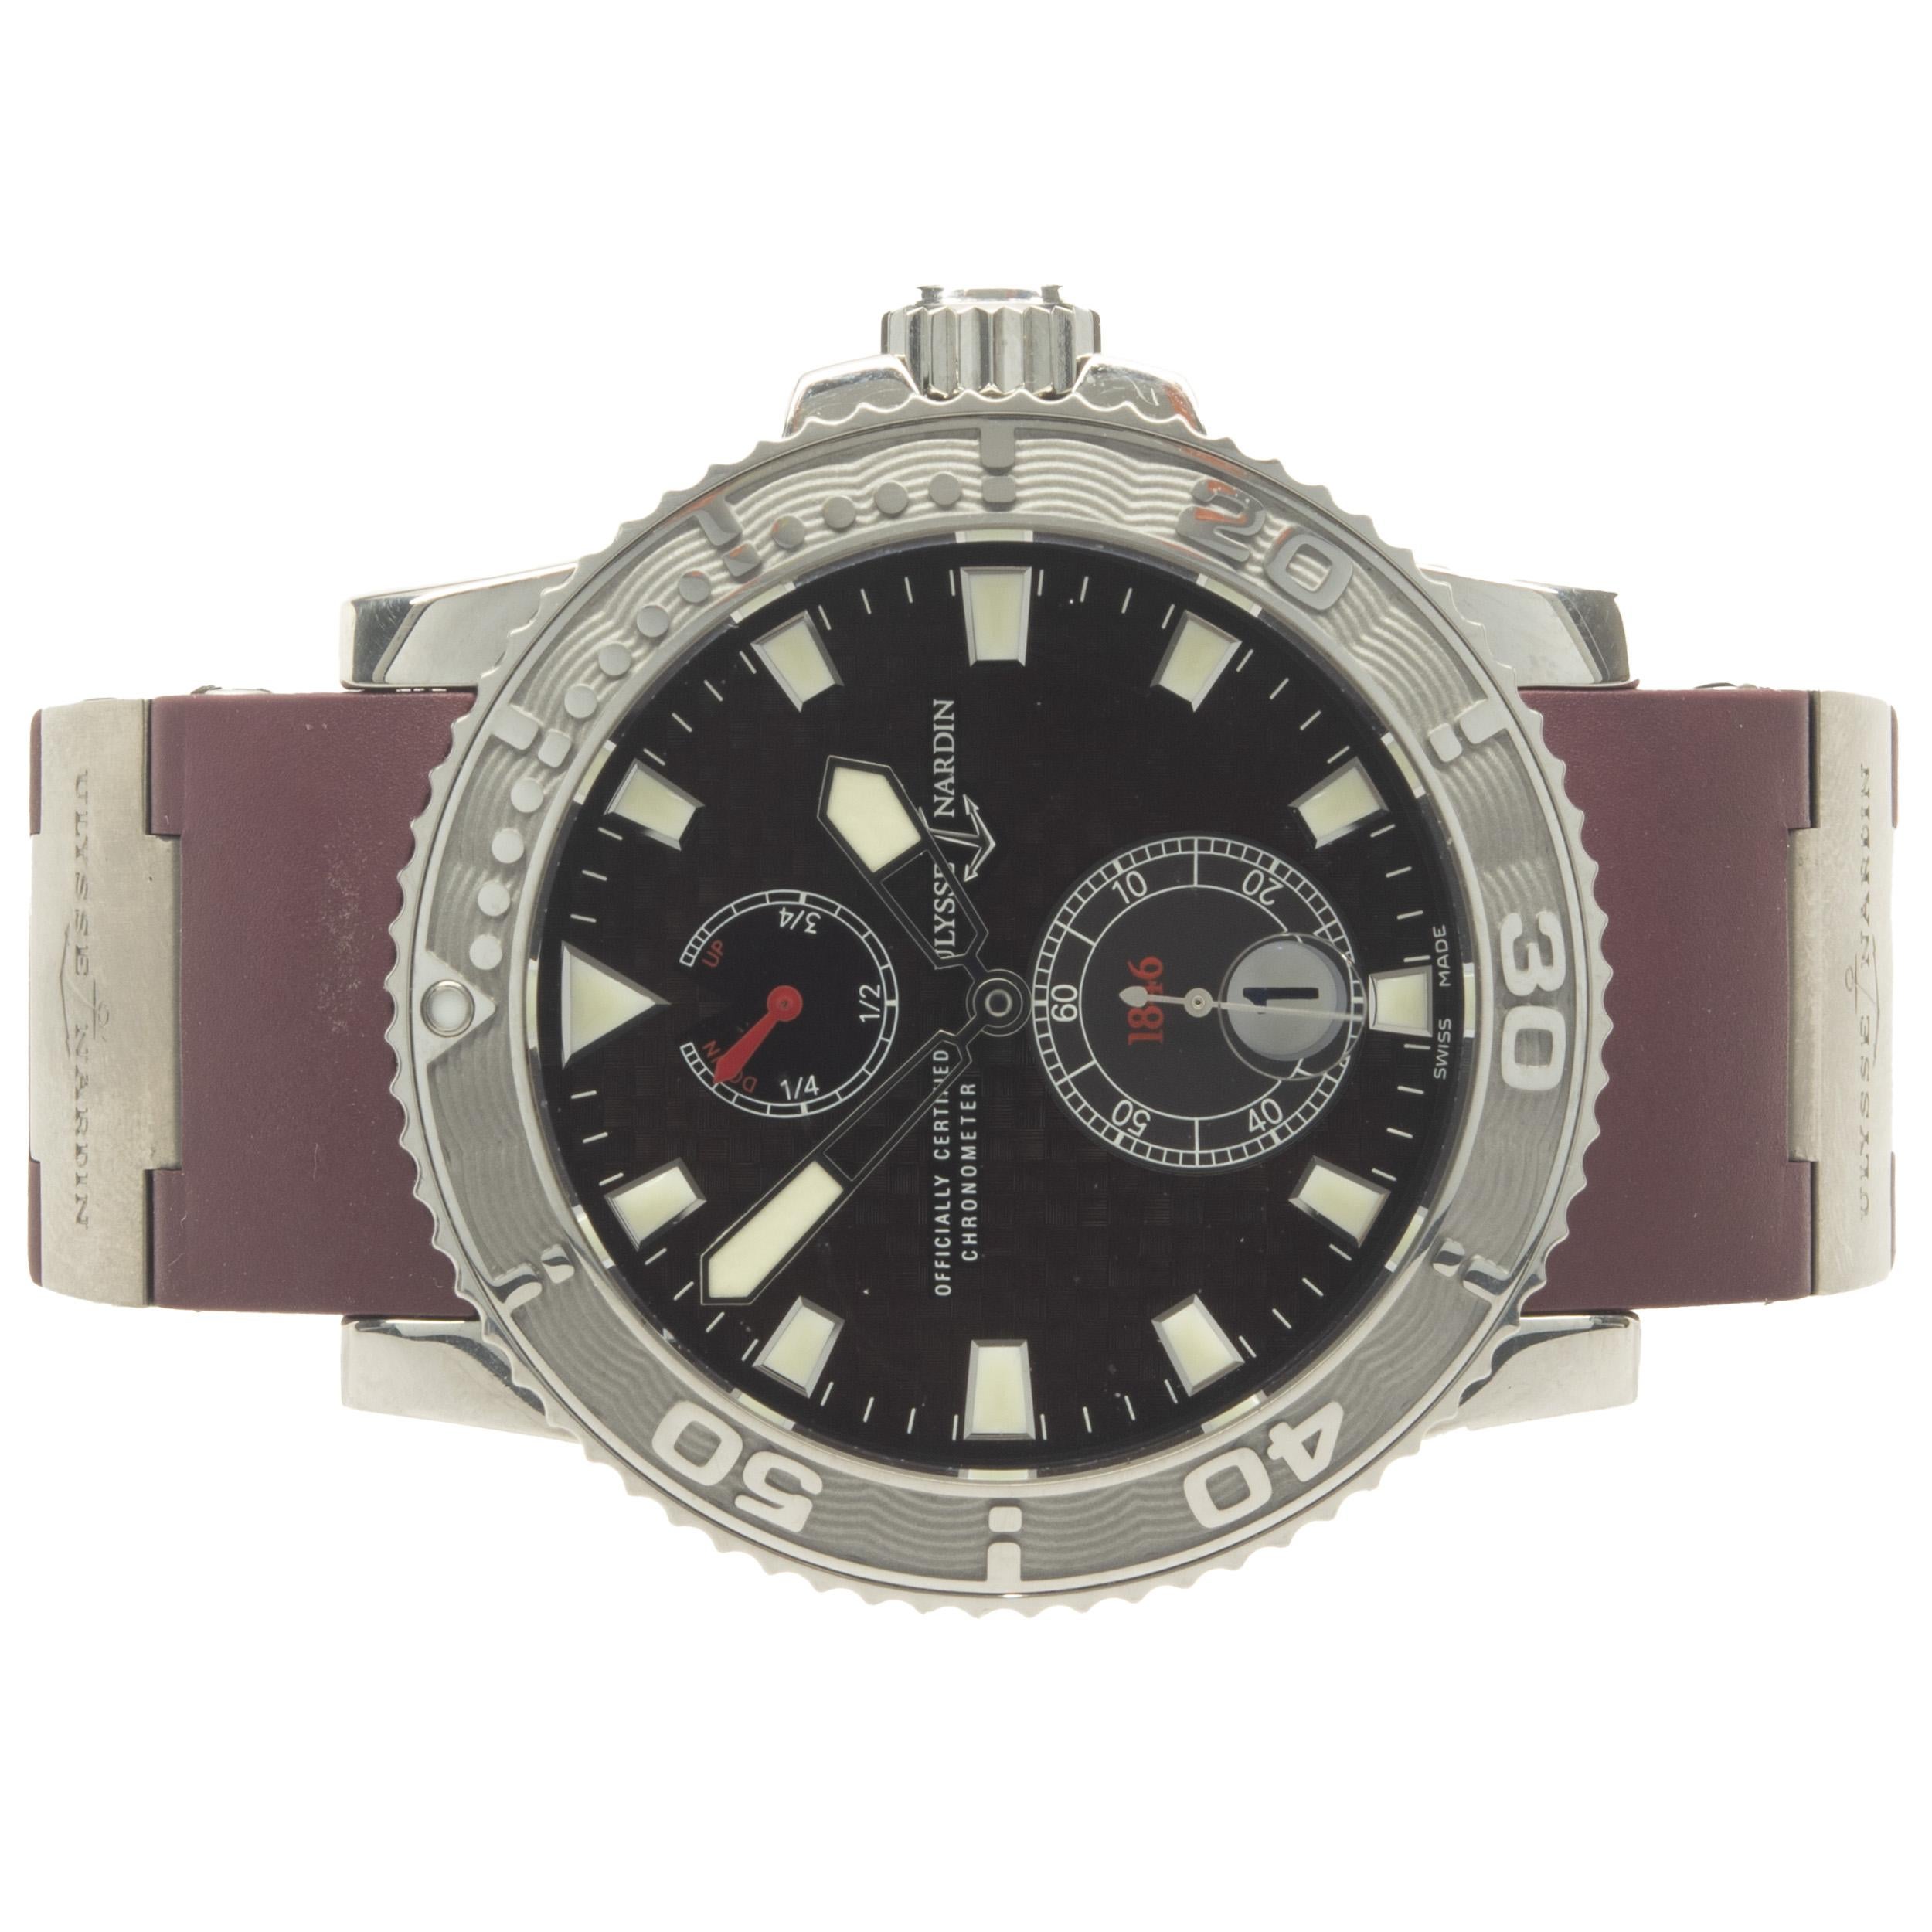 Movement: automatic
Function: hours, minutes, seconds, date, uni-directional rotating bezel
Case: 42.7mm stainless steel round, sapphire crystal, screw down crown
Band: maroon rubber strap, deployment clasp
Dial: maroon stick
Serial#: No